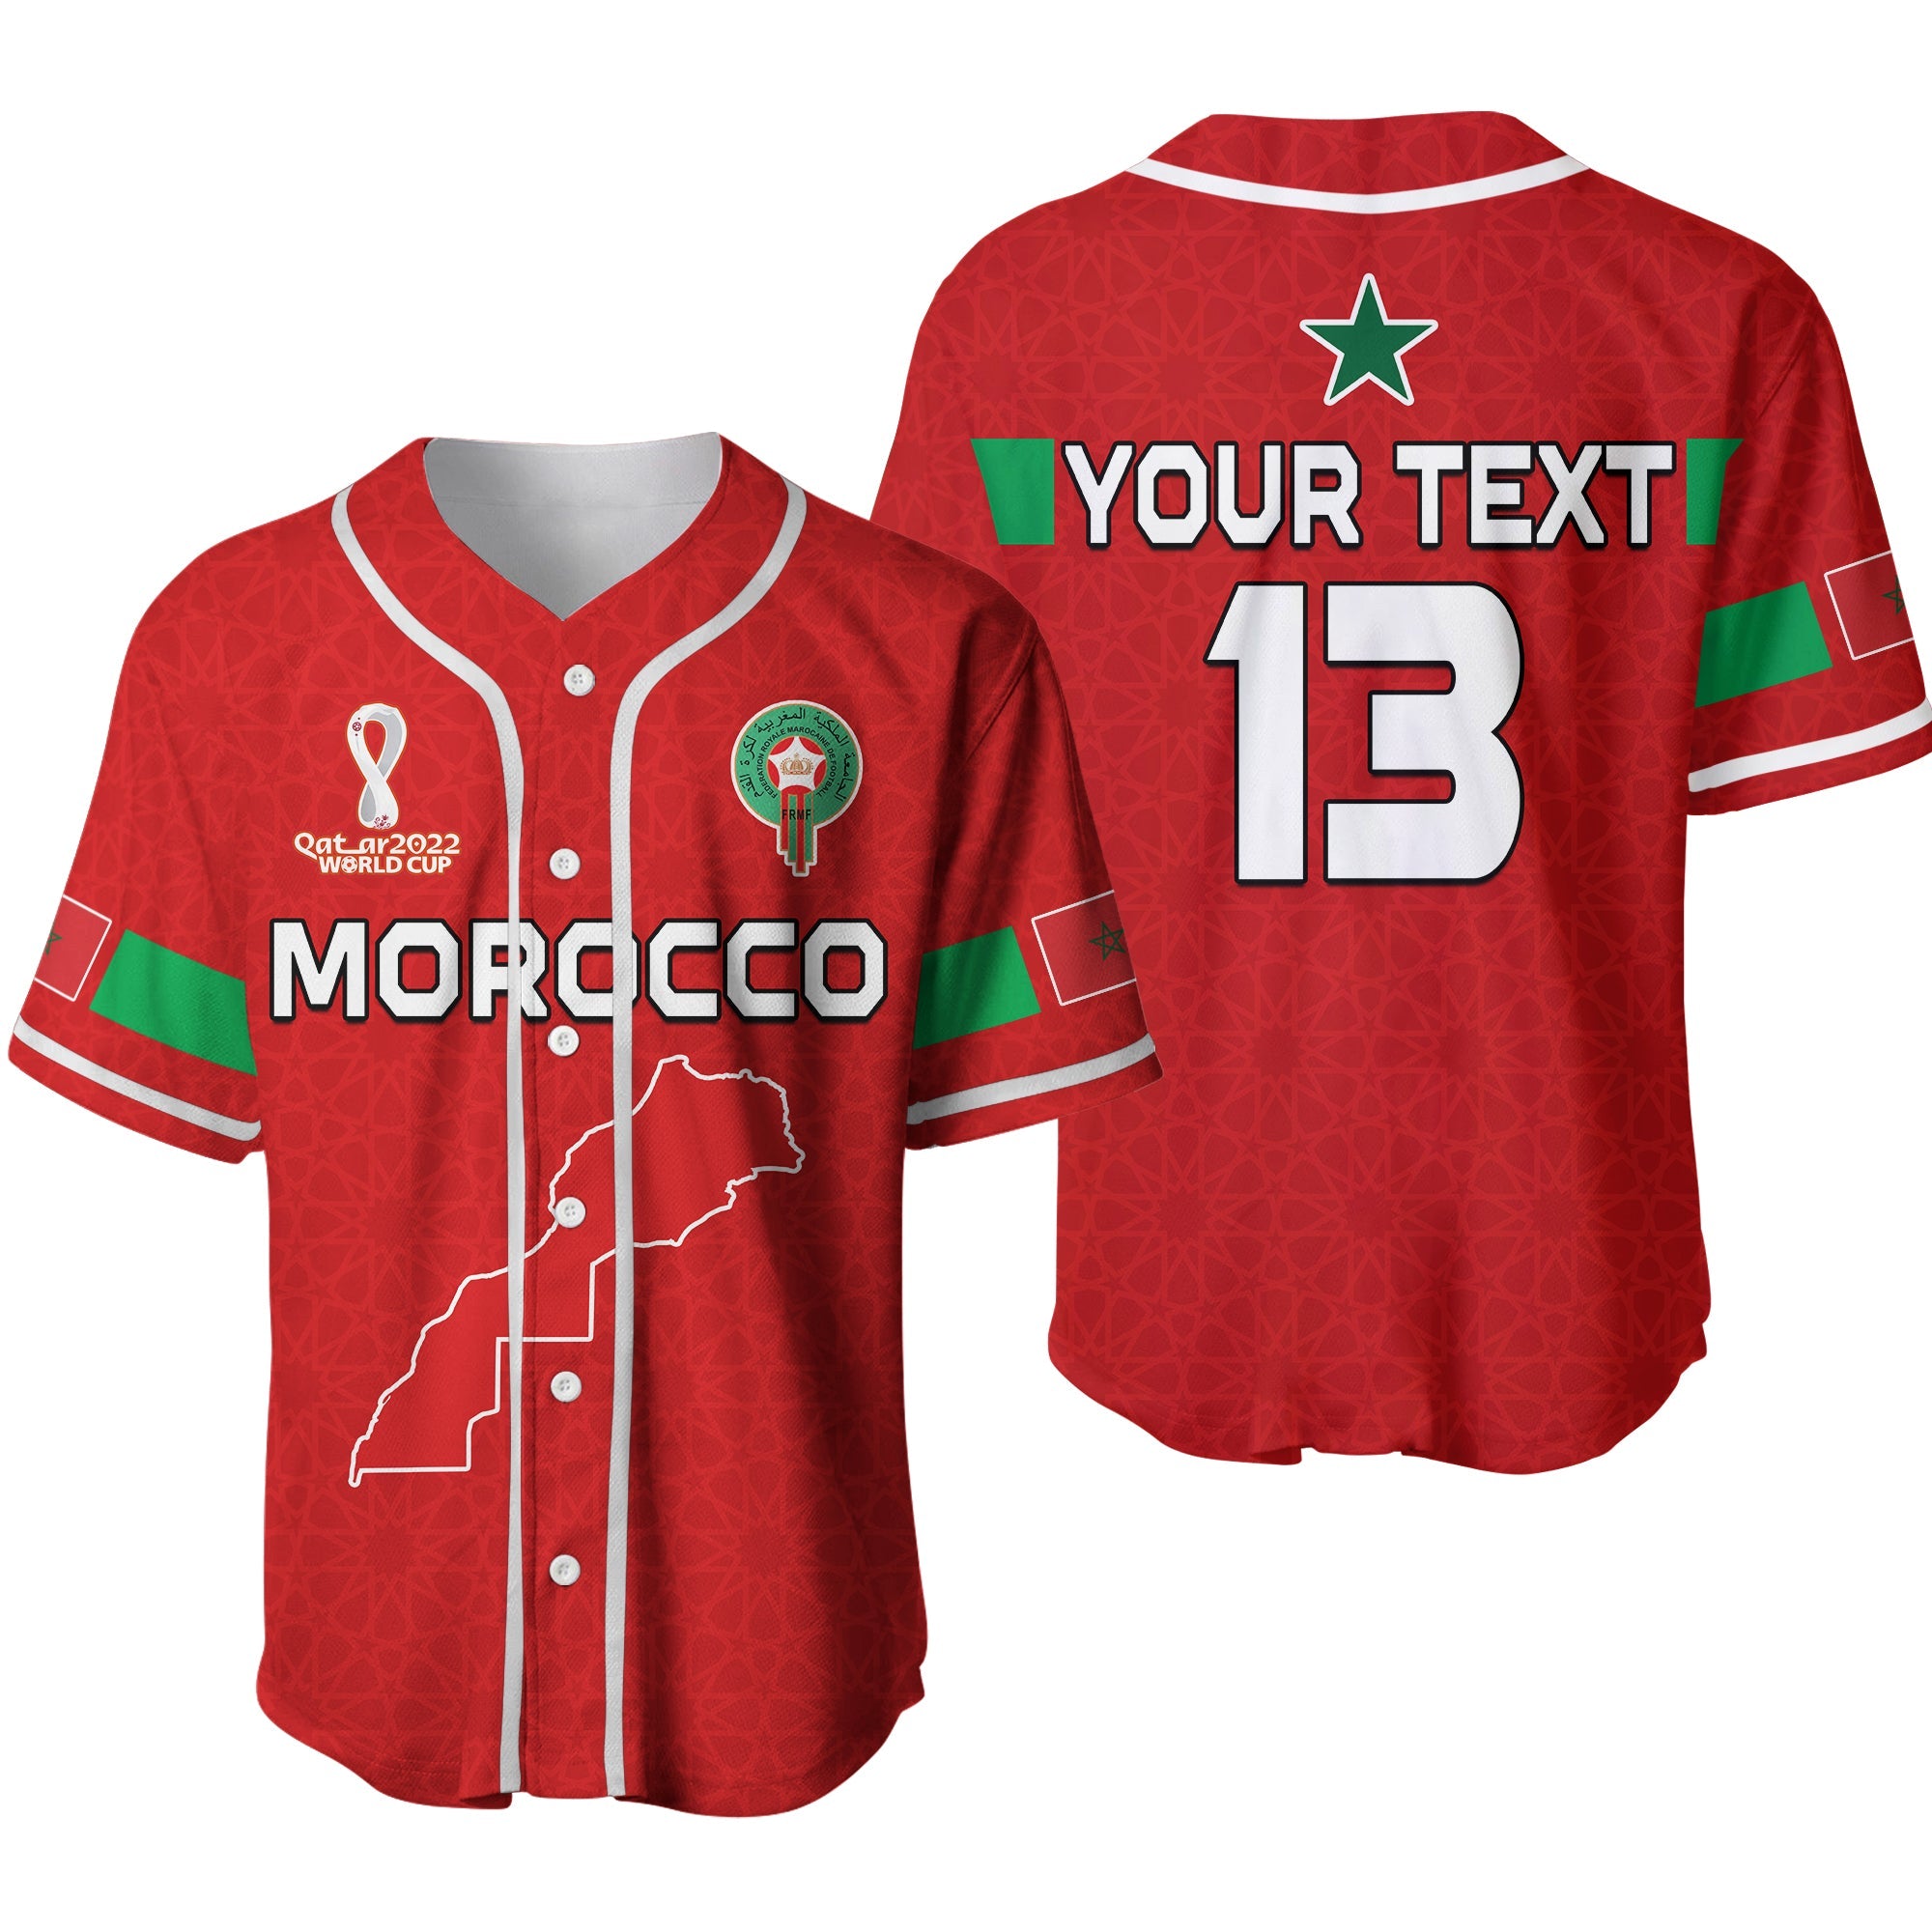 custom-text-and-number-morocco-football-baseball-jersey-champions-world-cup-new-history-ver02